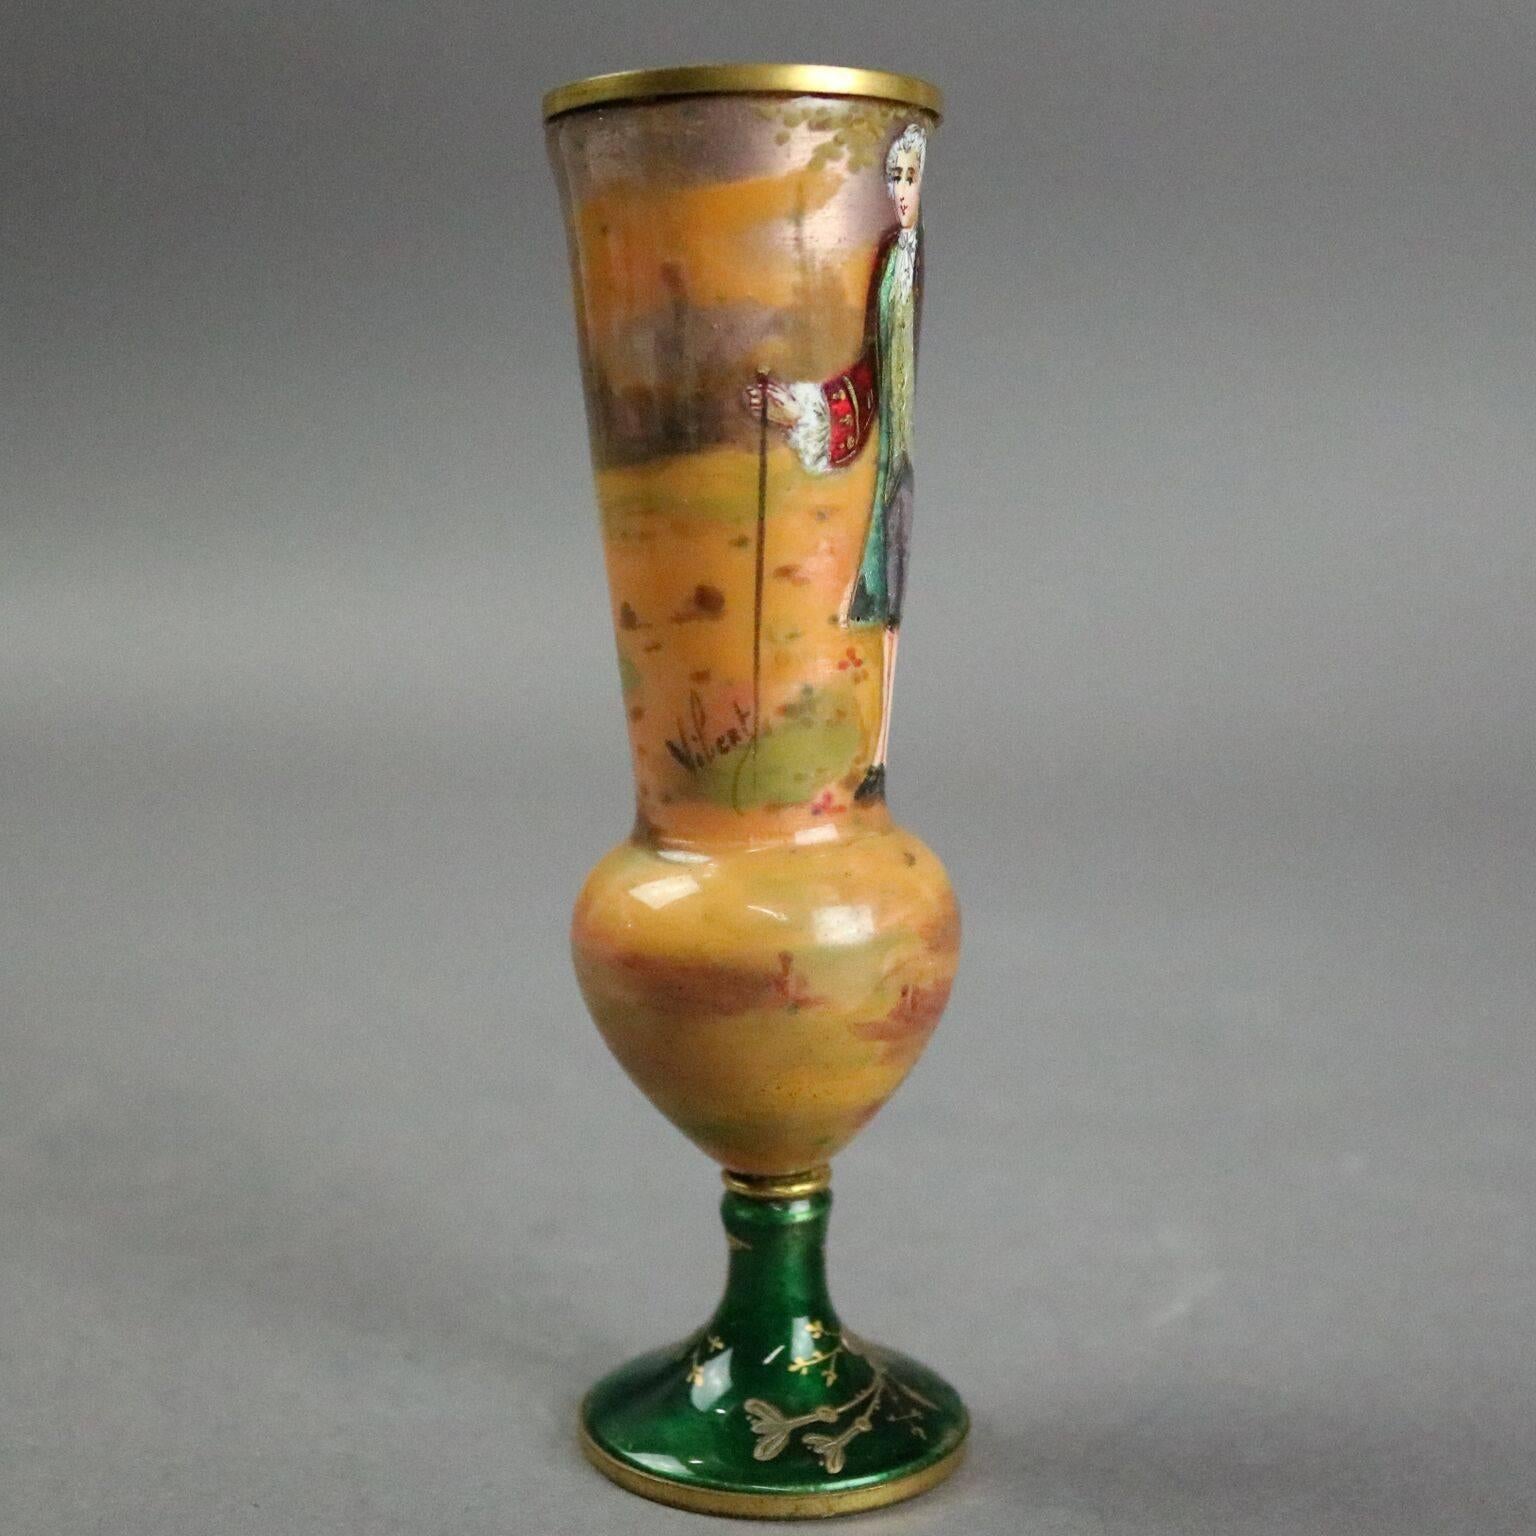 Antique French copper footed vase features hand enameled portrait of statesman on landscape ground atop green base with gold foliate decoration, artist signed Vile, circa 1880

Measures: 4.25" height x 1.25" diameter.